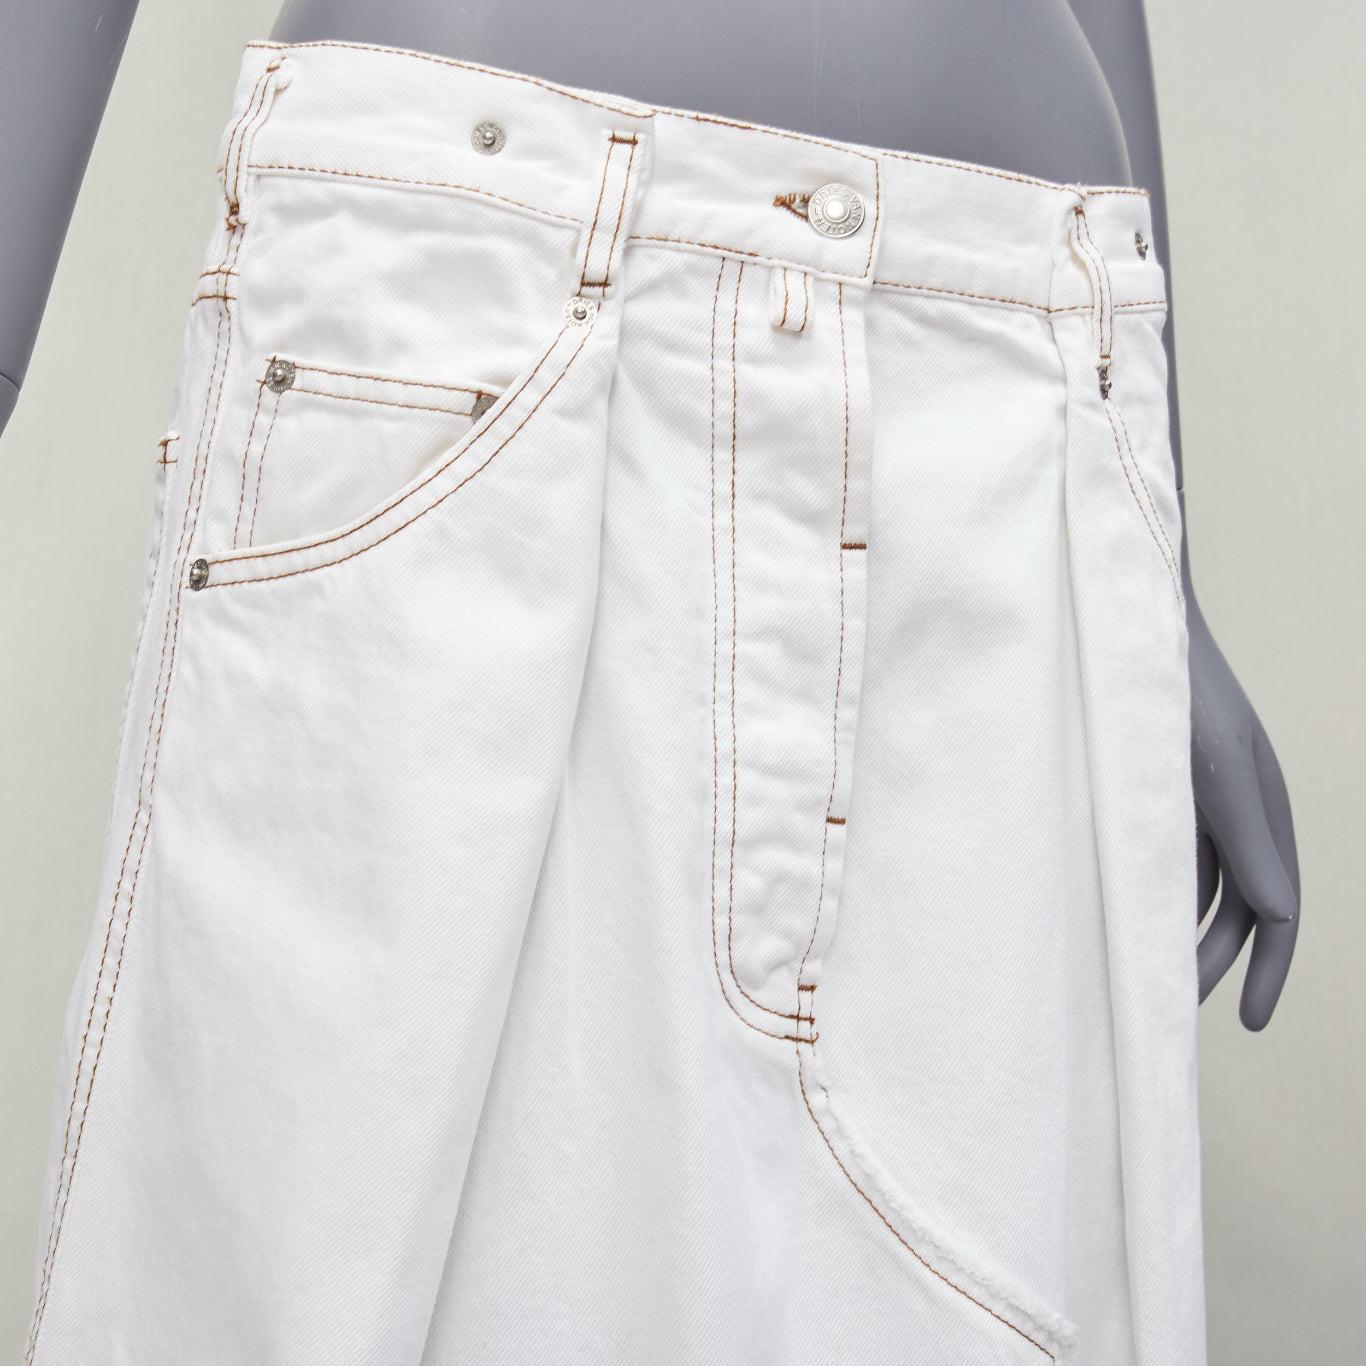 DRIES VAN NOTEN white cotton brown overstitched A-line denim skirt FR38 M
Reference: DYTG/A00065
Brand: Dries Van Noten
Material: Cotton
Color: White, Brown
Pattern: Solid
Closure: Button Fly
Extra Details: Hidden button fly.
Made in: